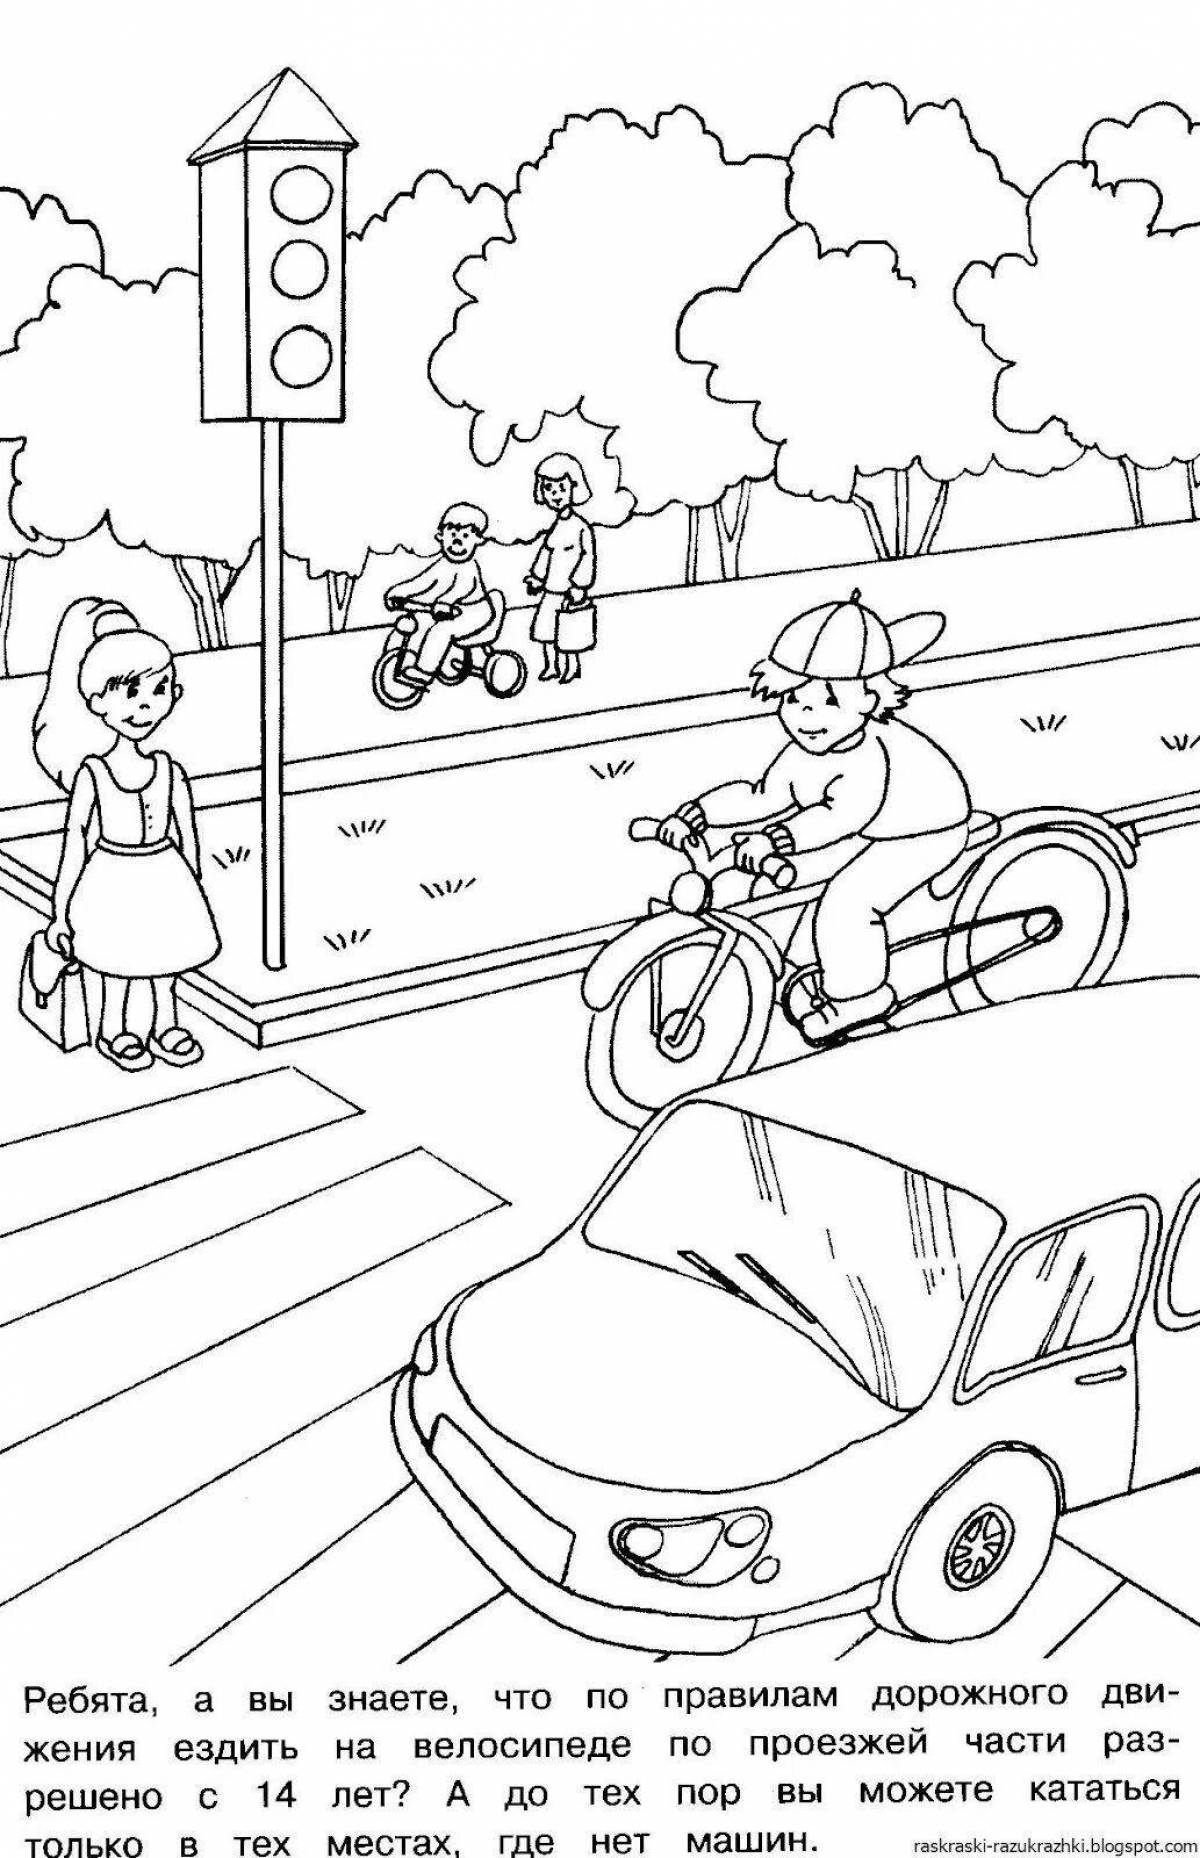 Attractive coloring book with rules of the road in kindergarten